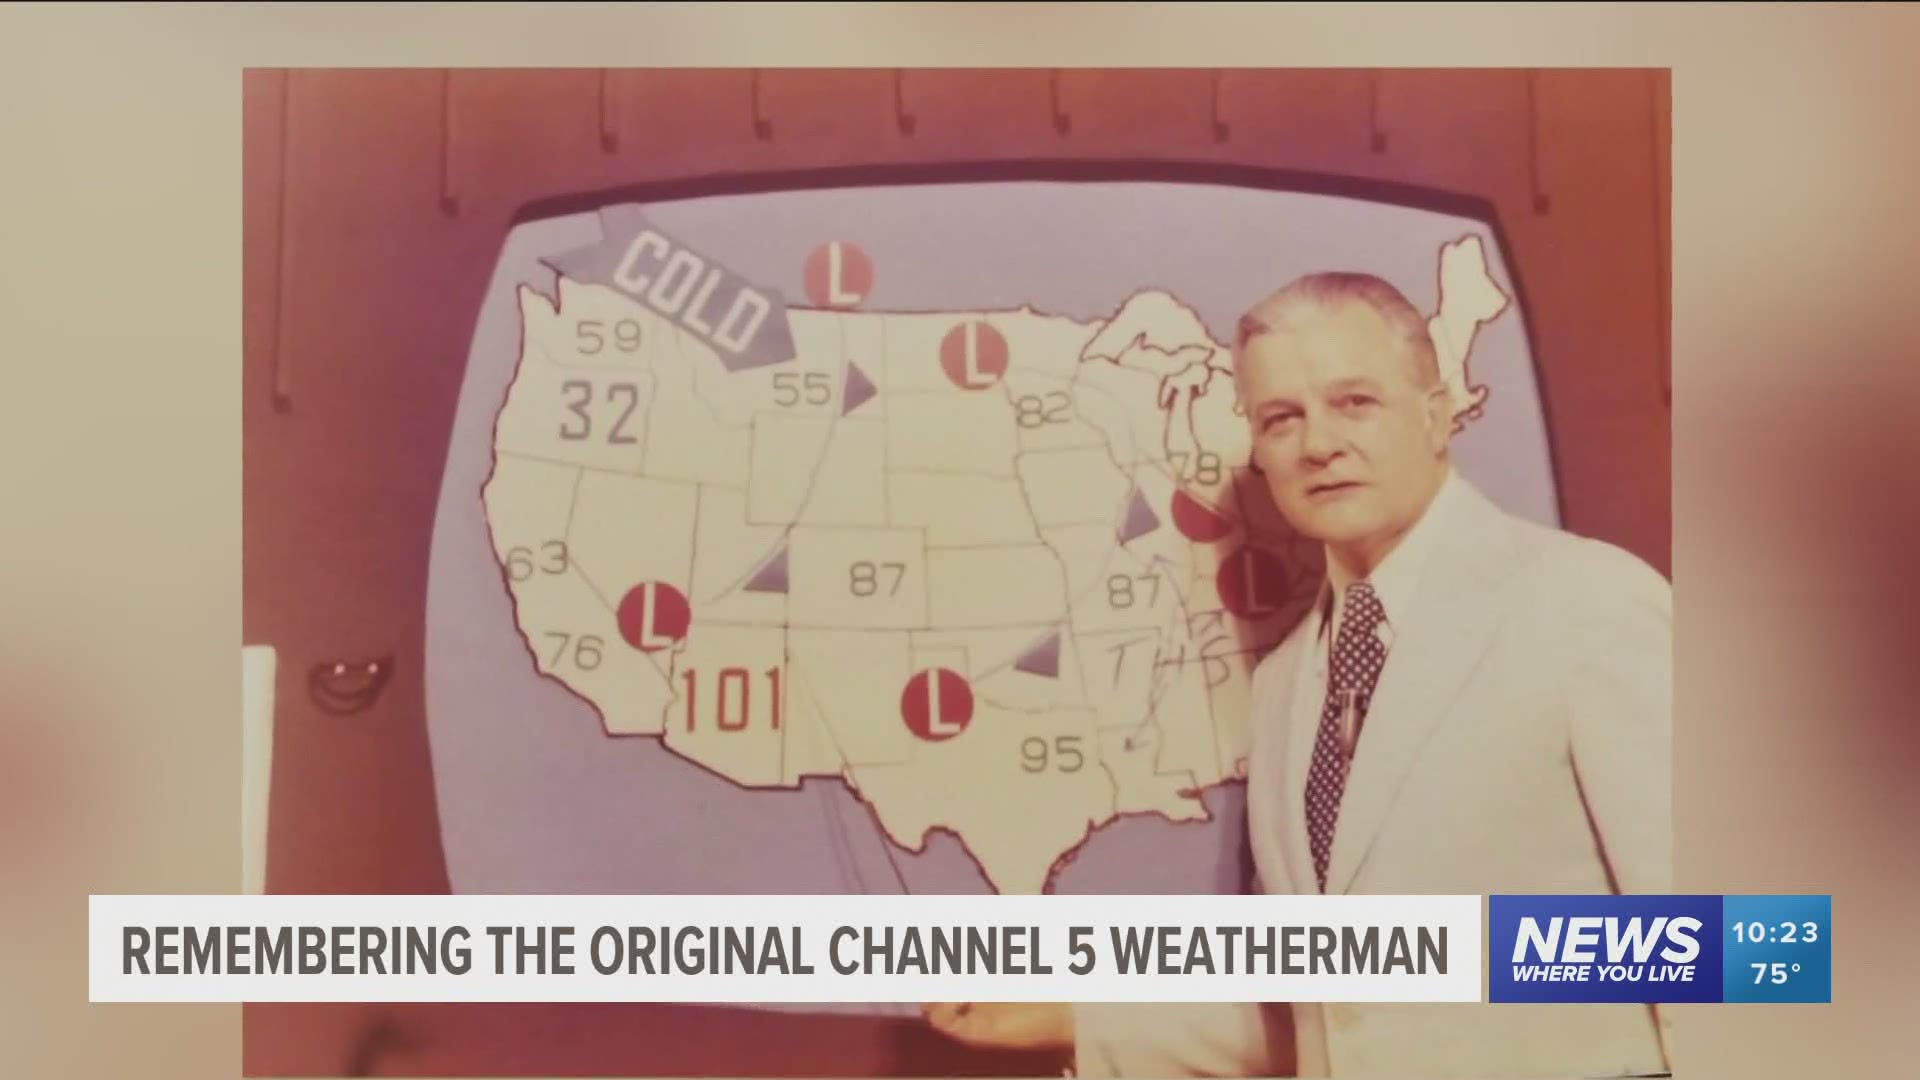 Milt Earnhart, a beloved figure in the Fort Smith Community, and first Channel 5 Weatherman, passed away on June 6, 2020.